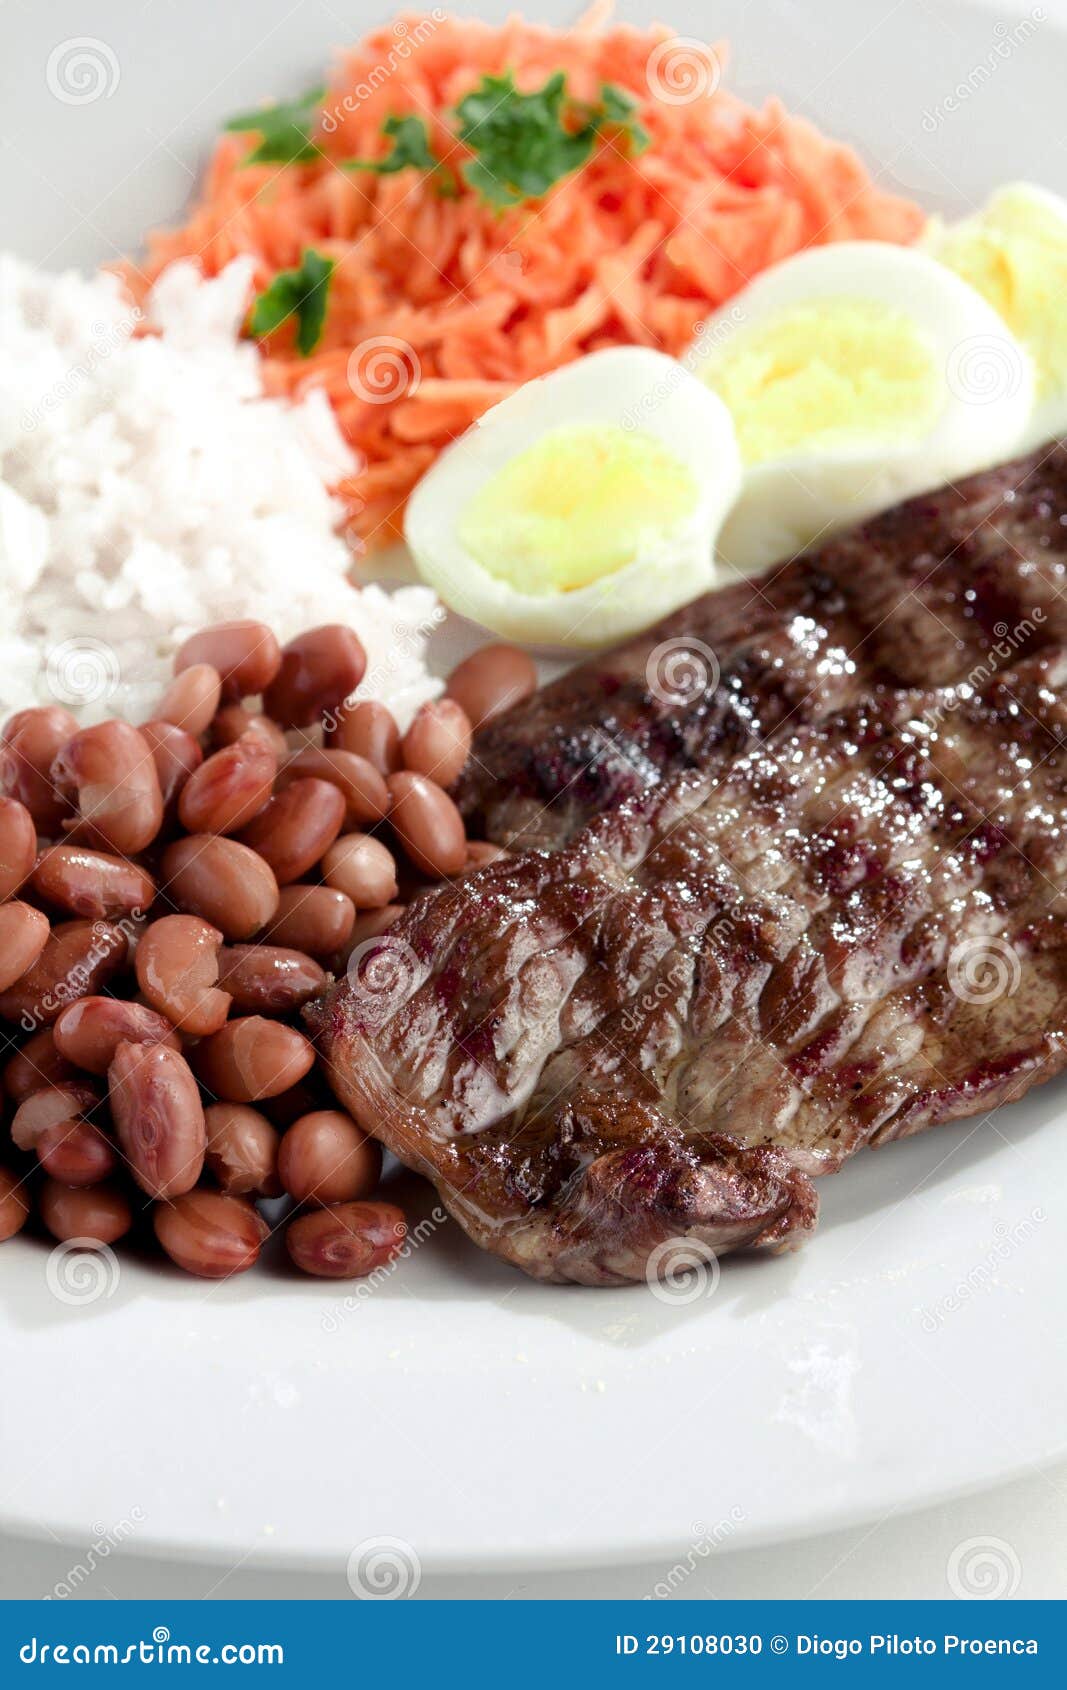 Typical Dish of Brazil, Rice and Beans Stock Photo - Image of roast ...